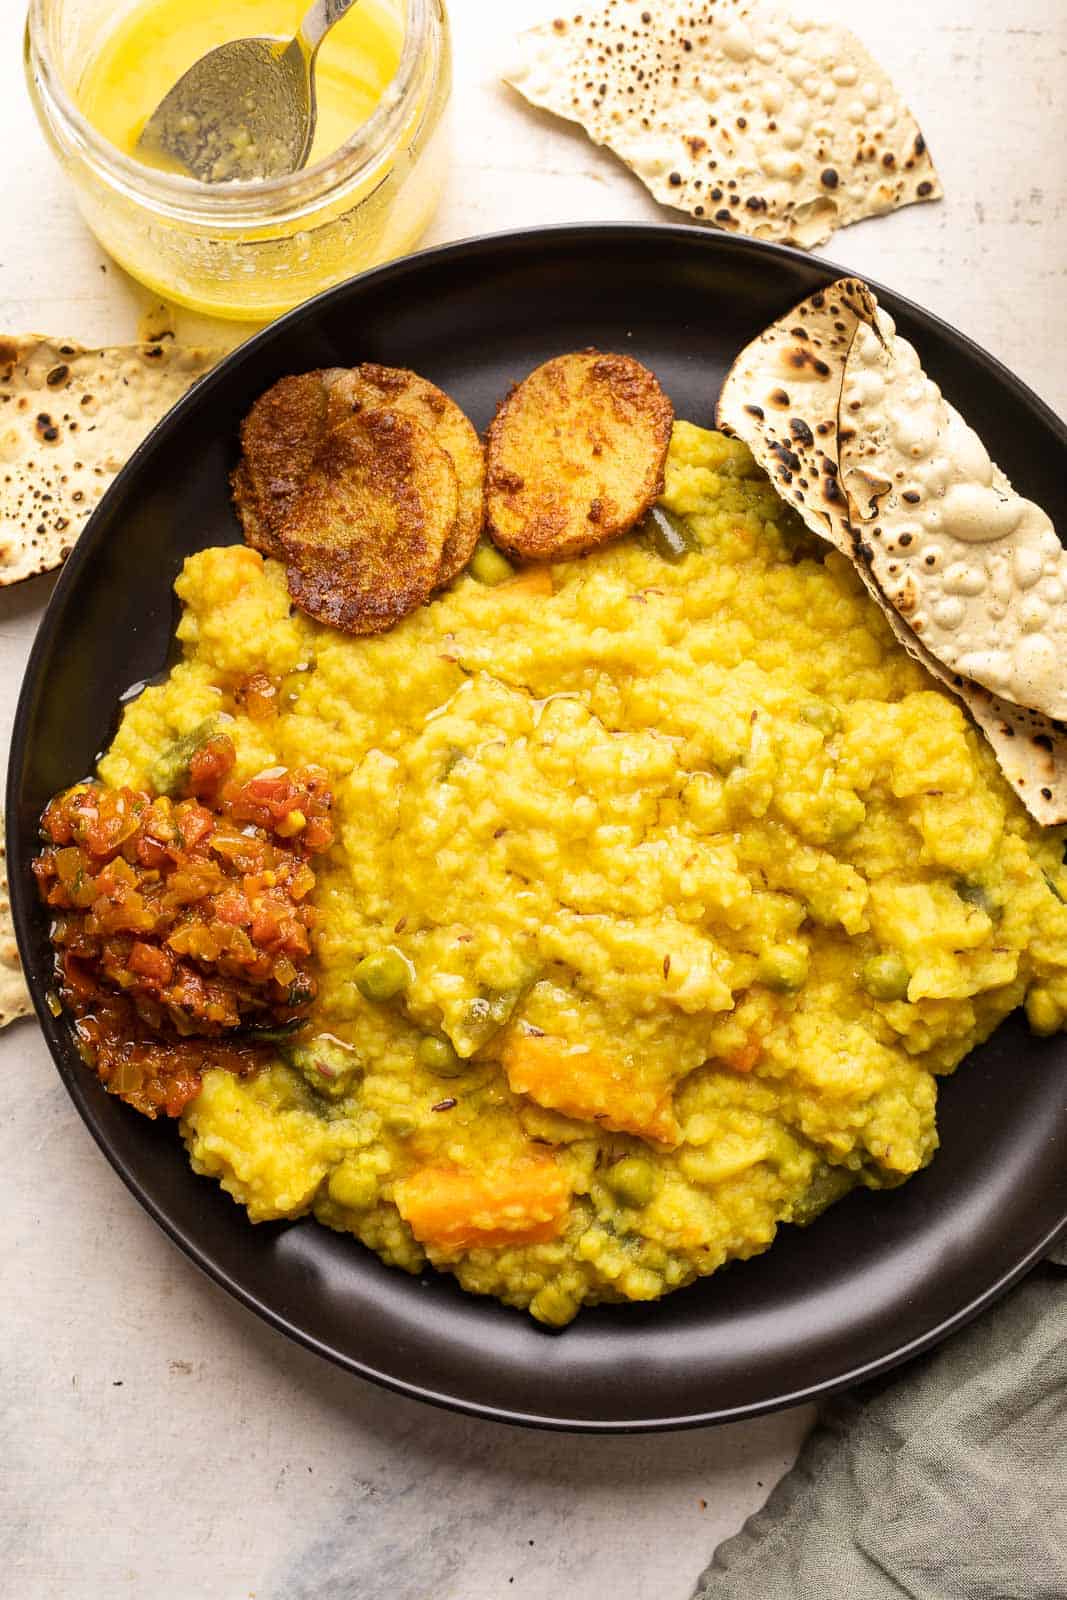 Khichdi served on a black plate with papad, tomato chutney and aloo fry